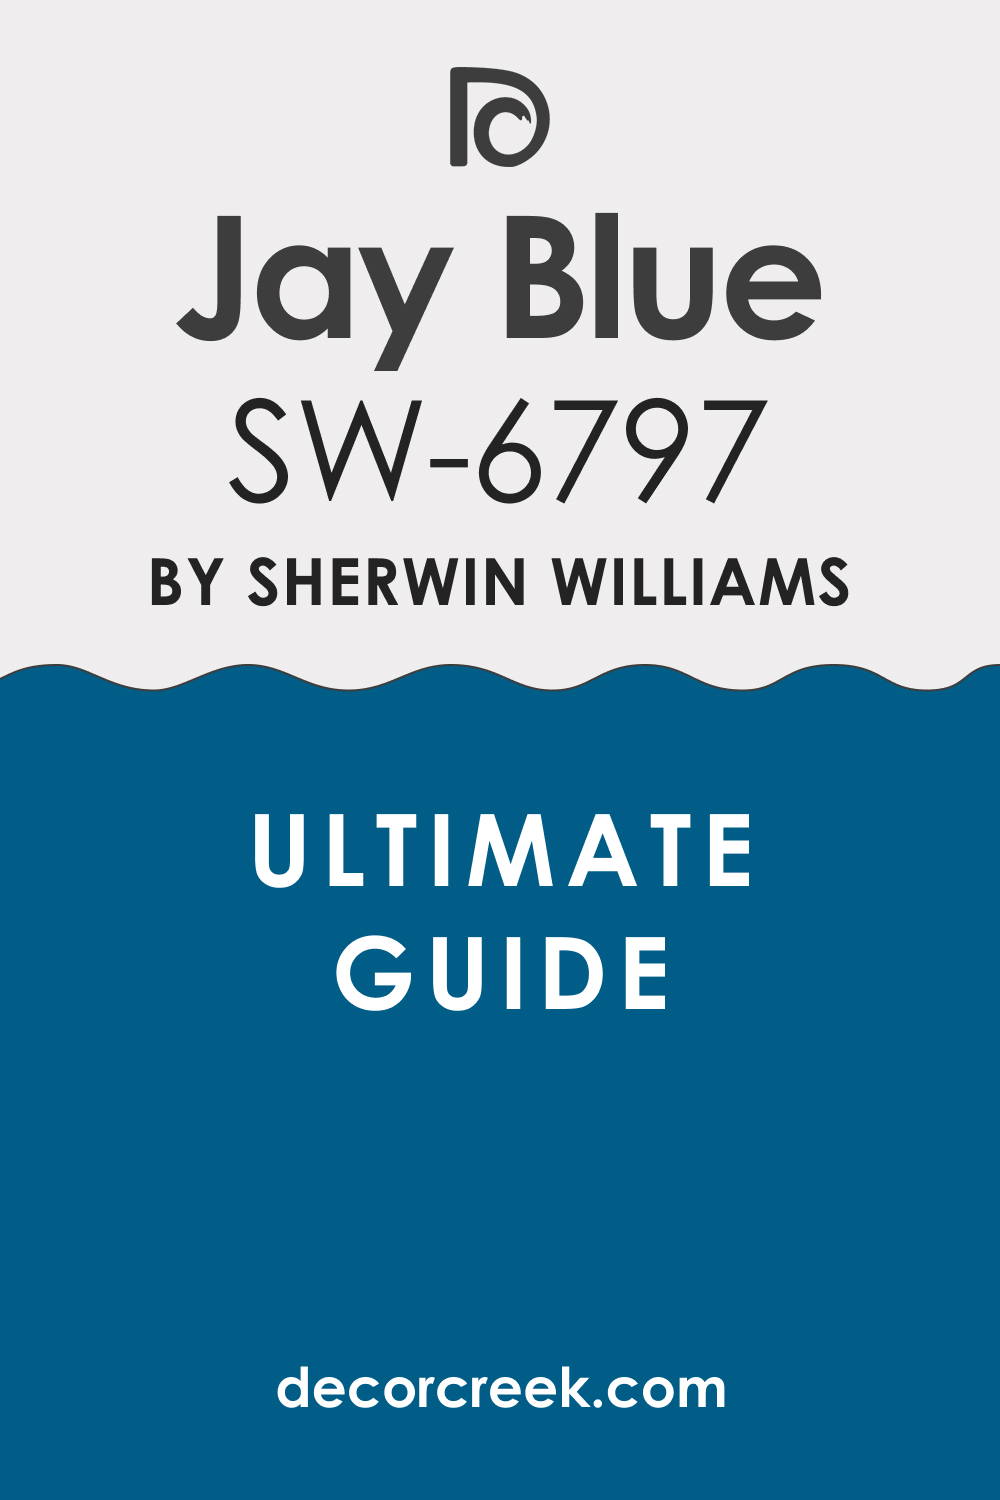 Ultimate Guide. Jay Blue SW 6797 Paint Color by Sherwin-Williams